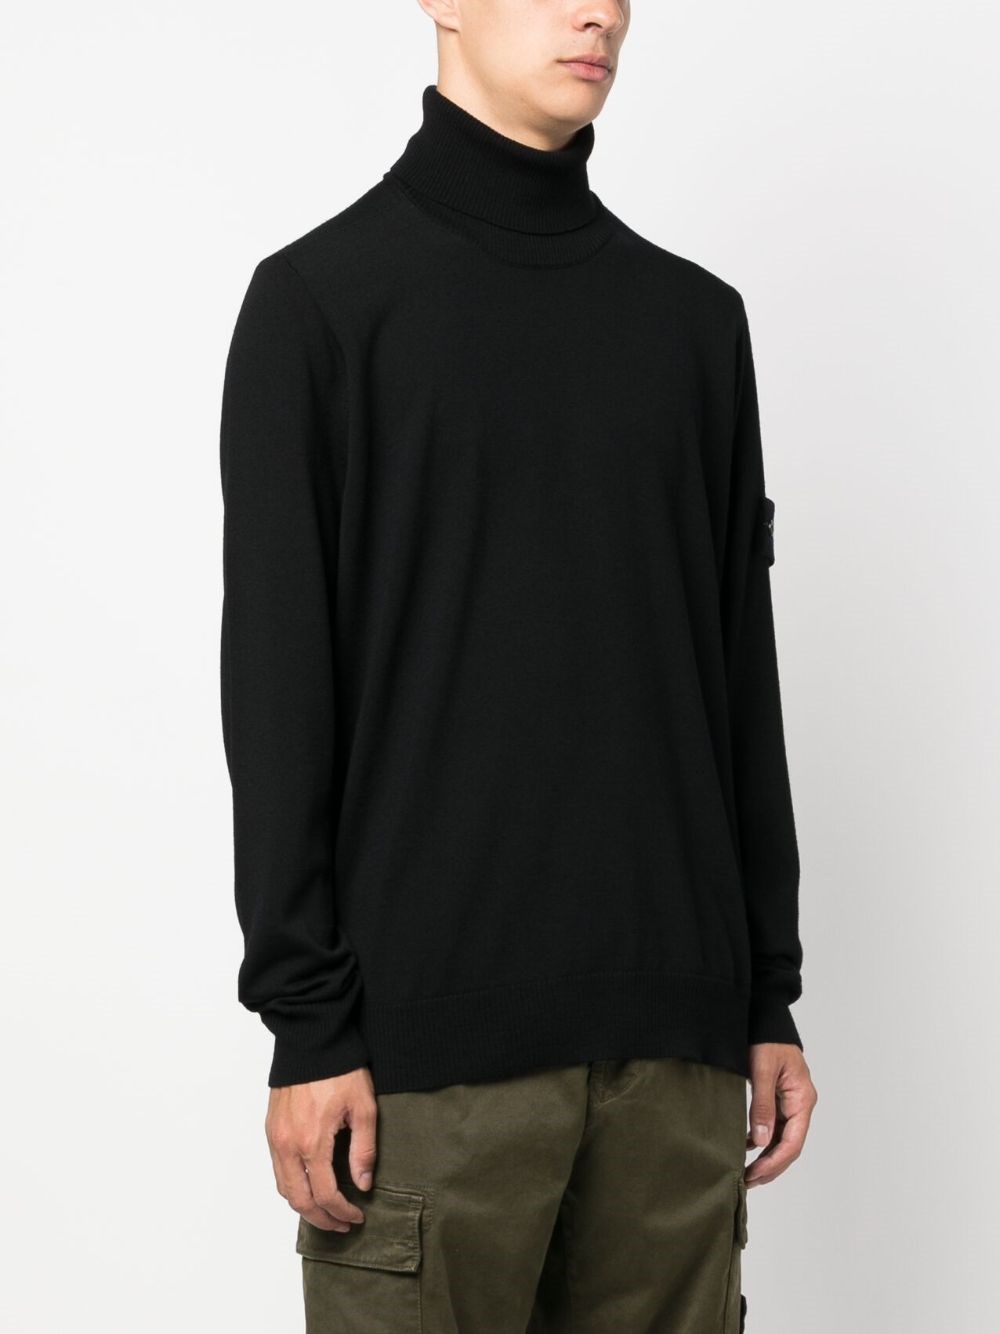 stone island 7915525C4 A0029 BLACK available on montiboutique.com - 56281